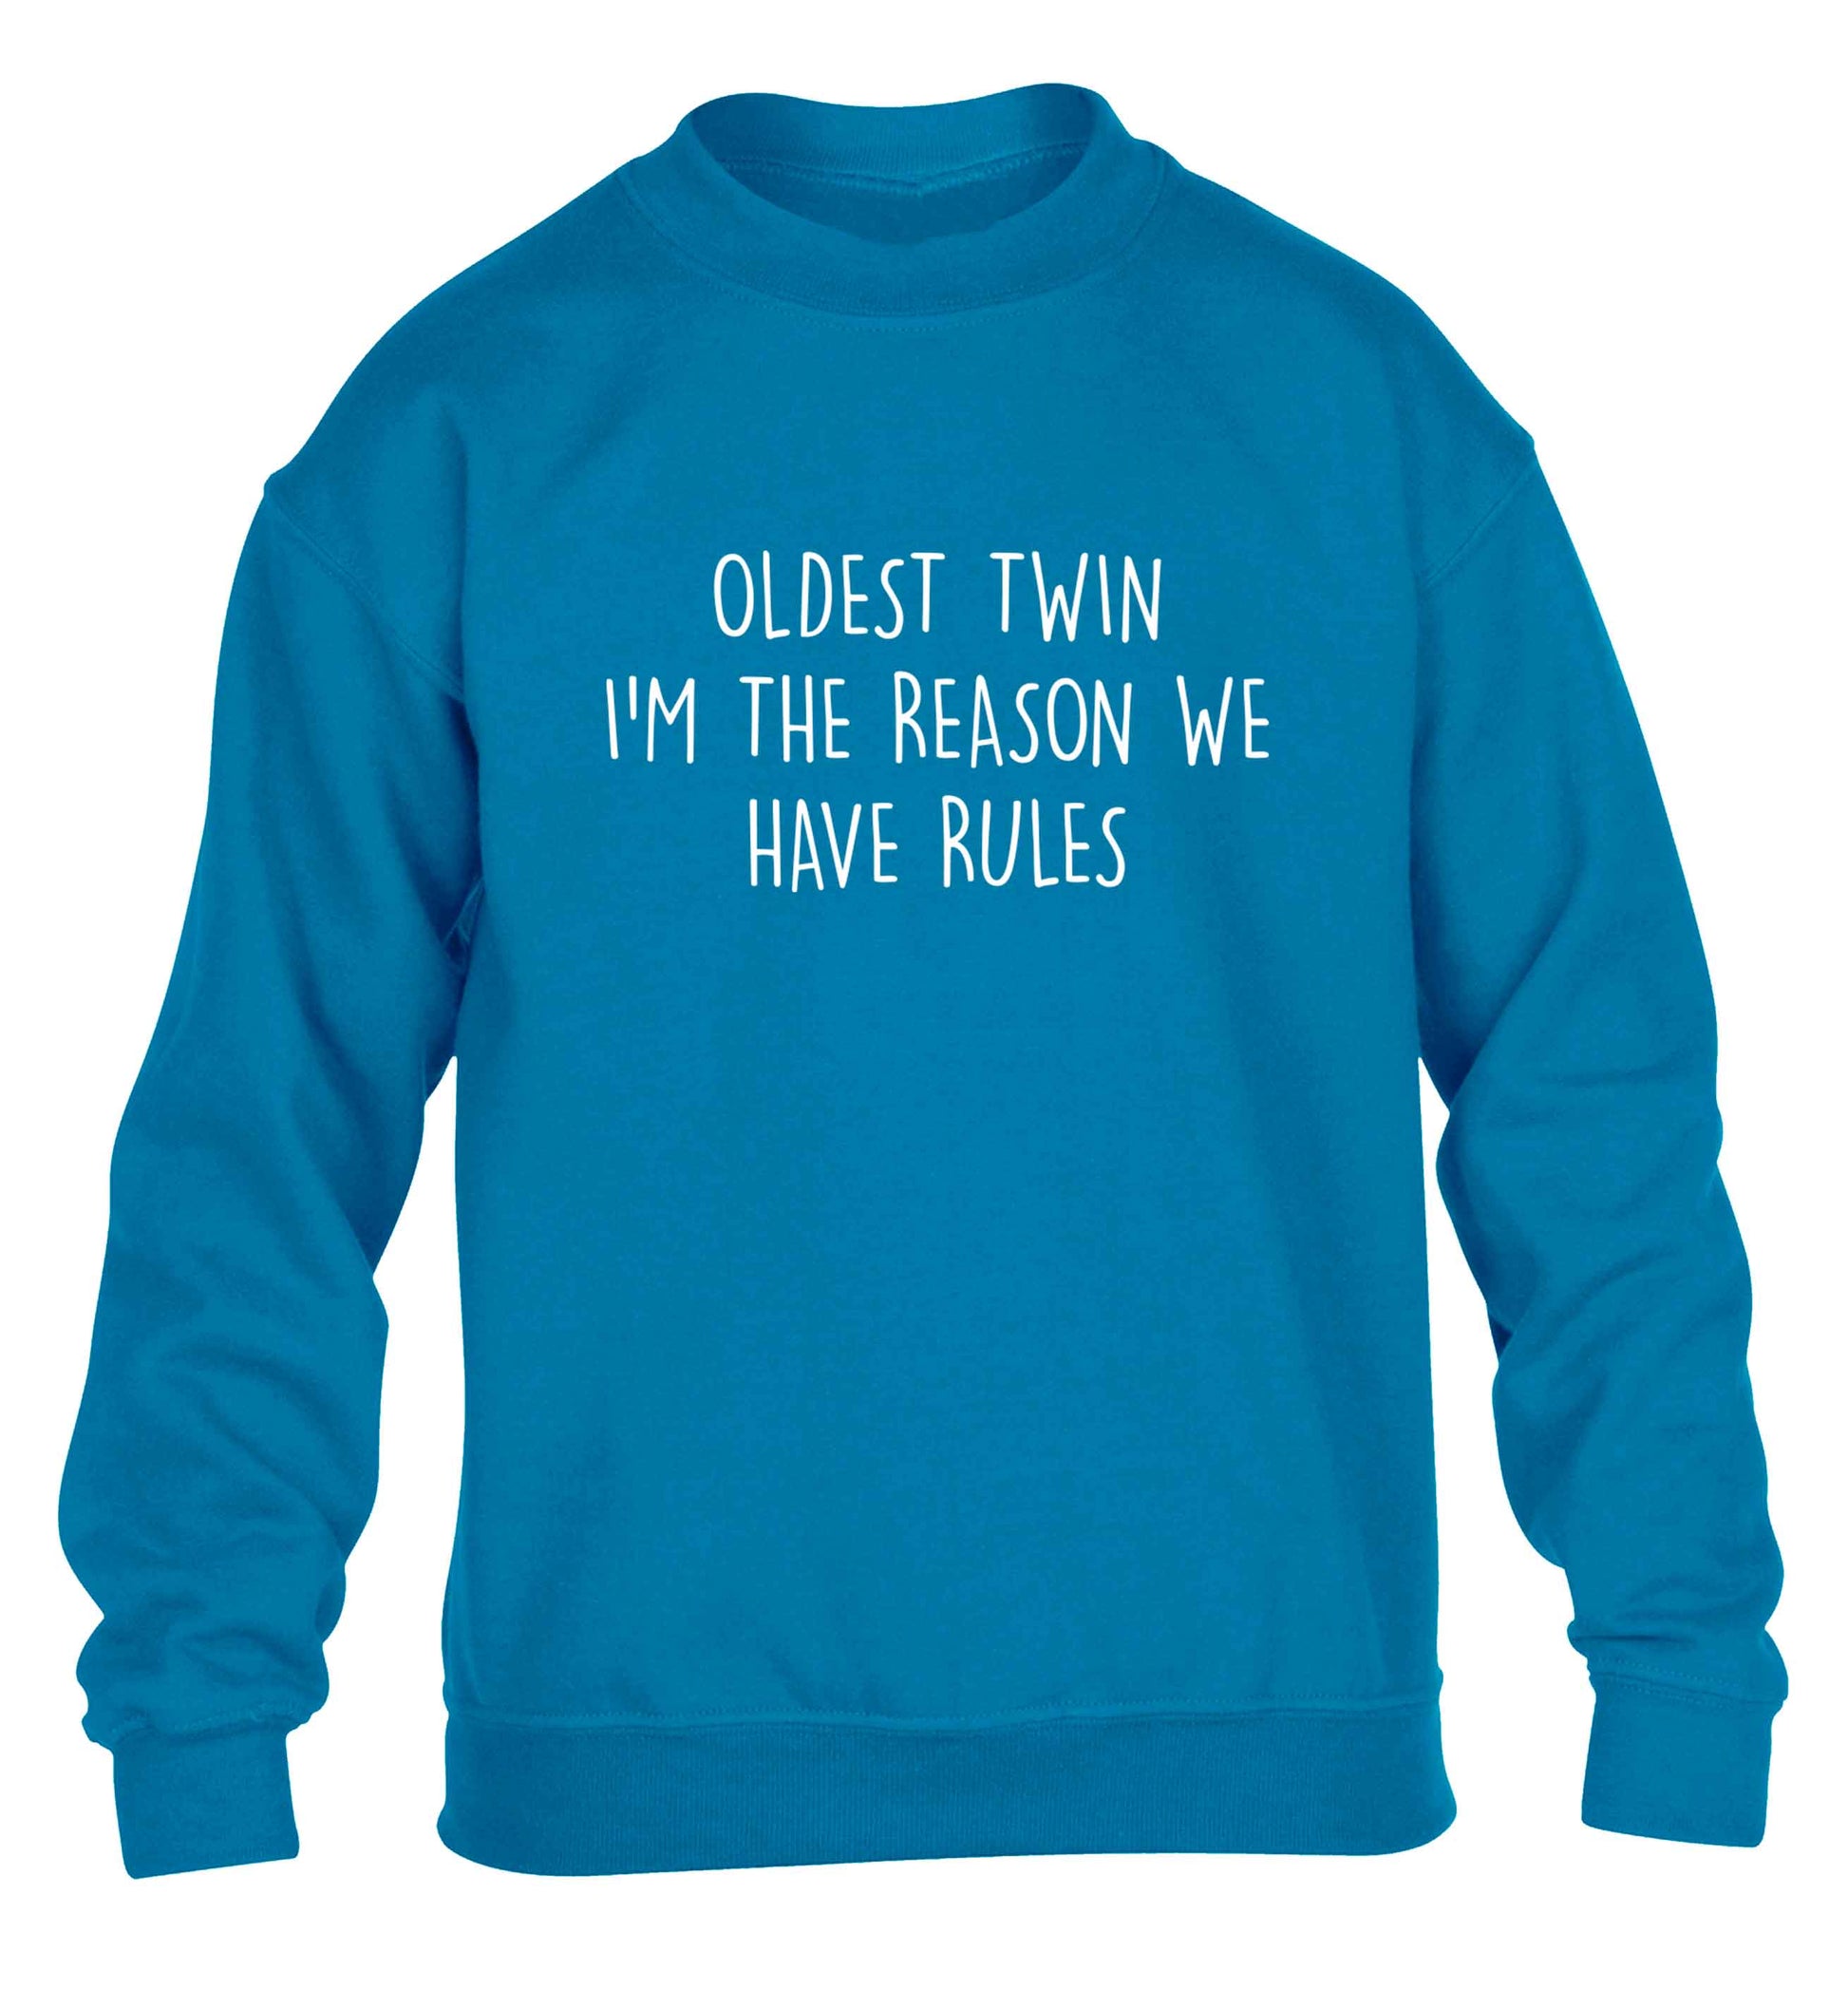 Oldest twin I'm the reason we have rules children's blue sweater 12-13 Years